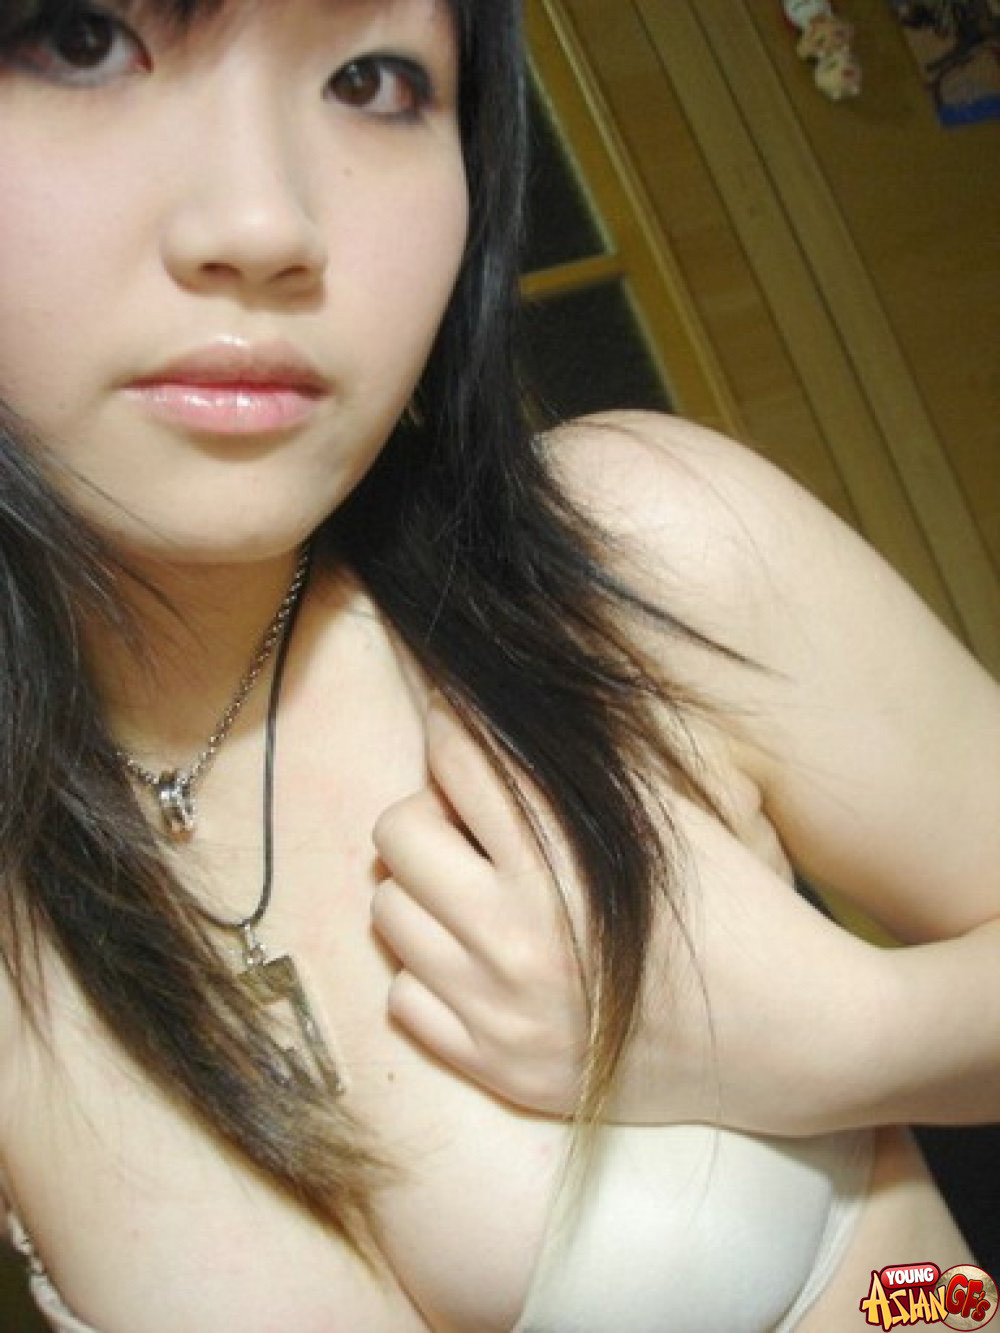 Asian teen girlfriends posing for cell phone pics